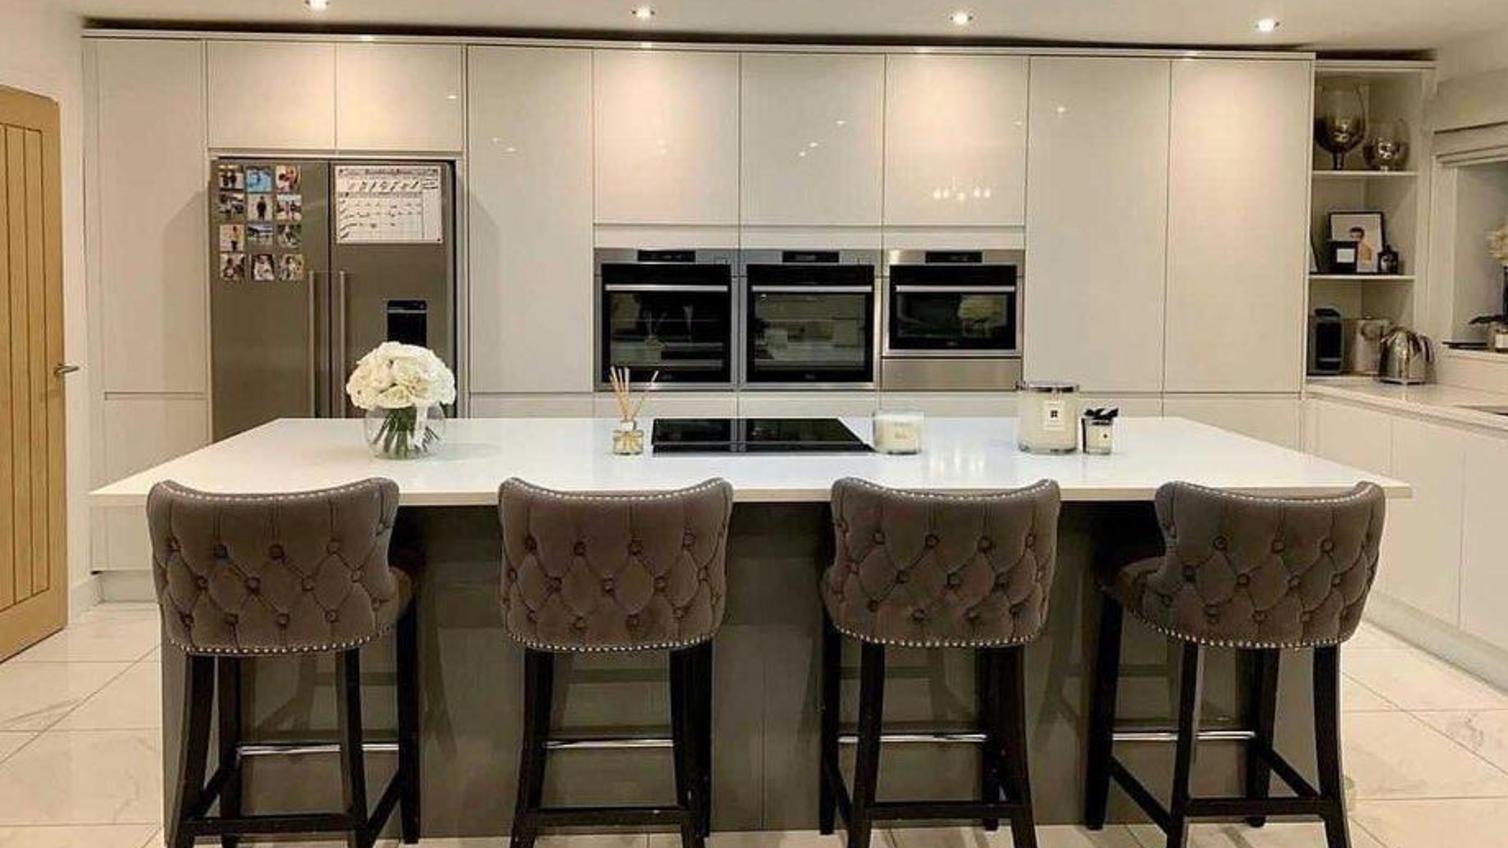 White gloss open-plan kitchen with an island, four grey stools and integrated appliances built into the wall.